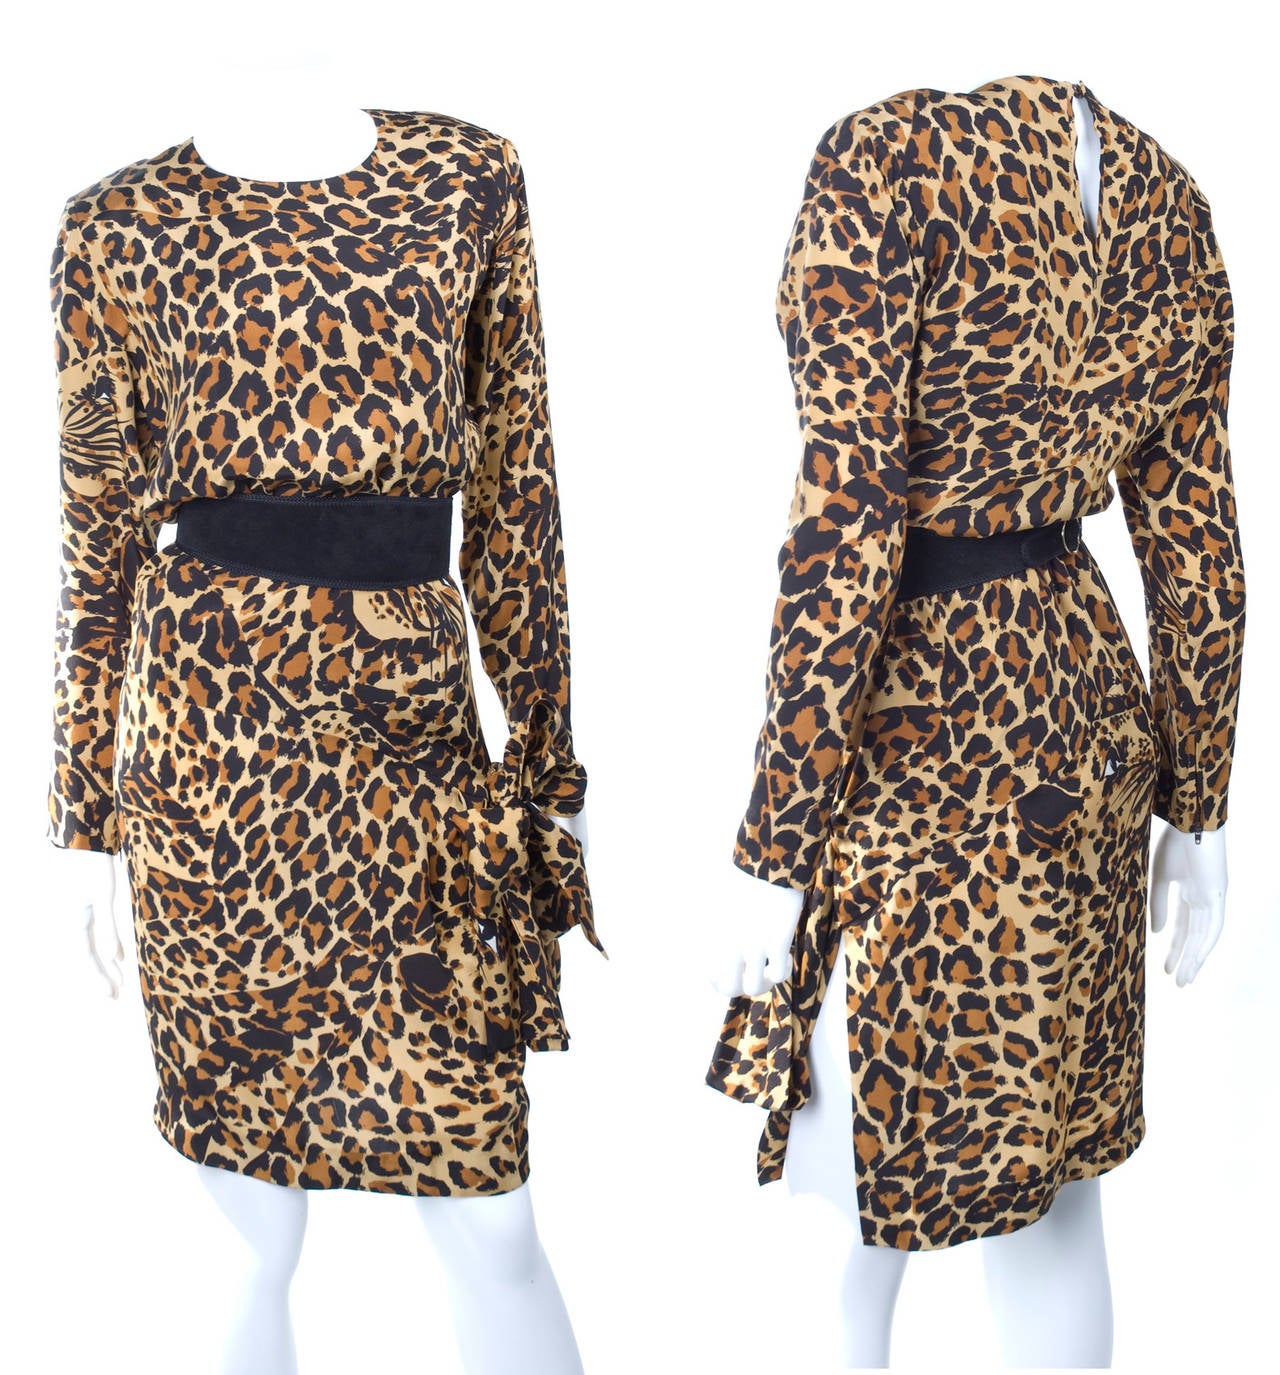 Iconic Vintage Yves Saint Laurent Silk Leopard Print Dress
Jacquard silk in camel,brown and black.
The black suede belt with corded trim.
Zipper in the back and at wrist.
Size 40 EU
Measurements:
Length 38 - Bust 38 - Waist 27 - Hips 38 inches